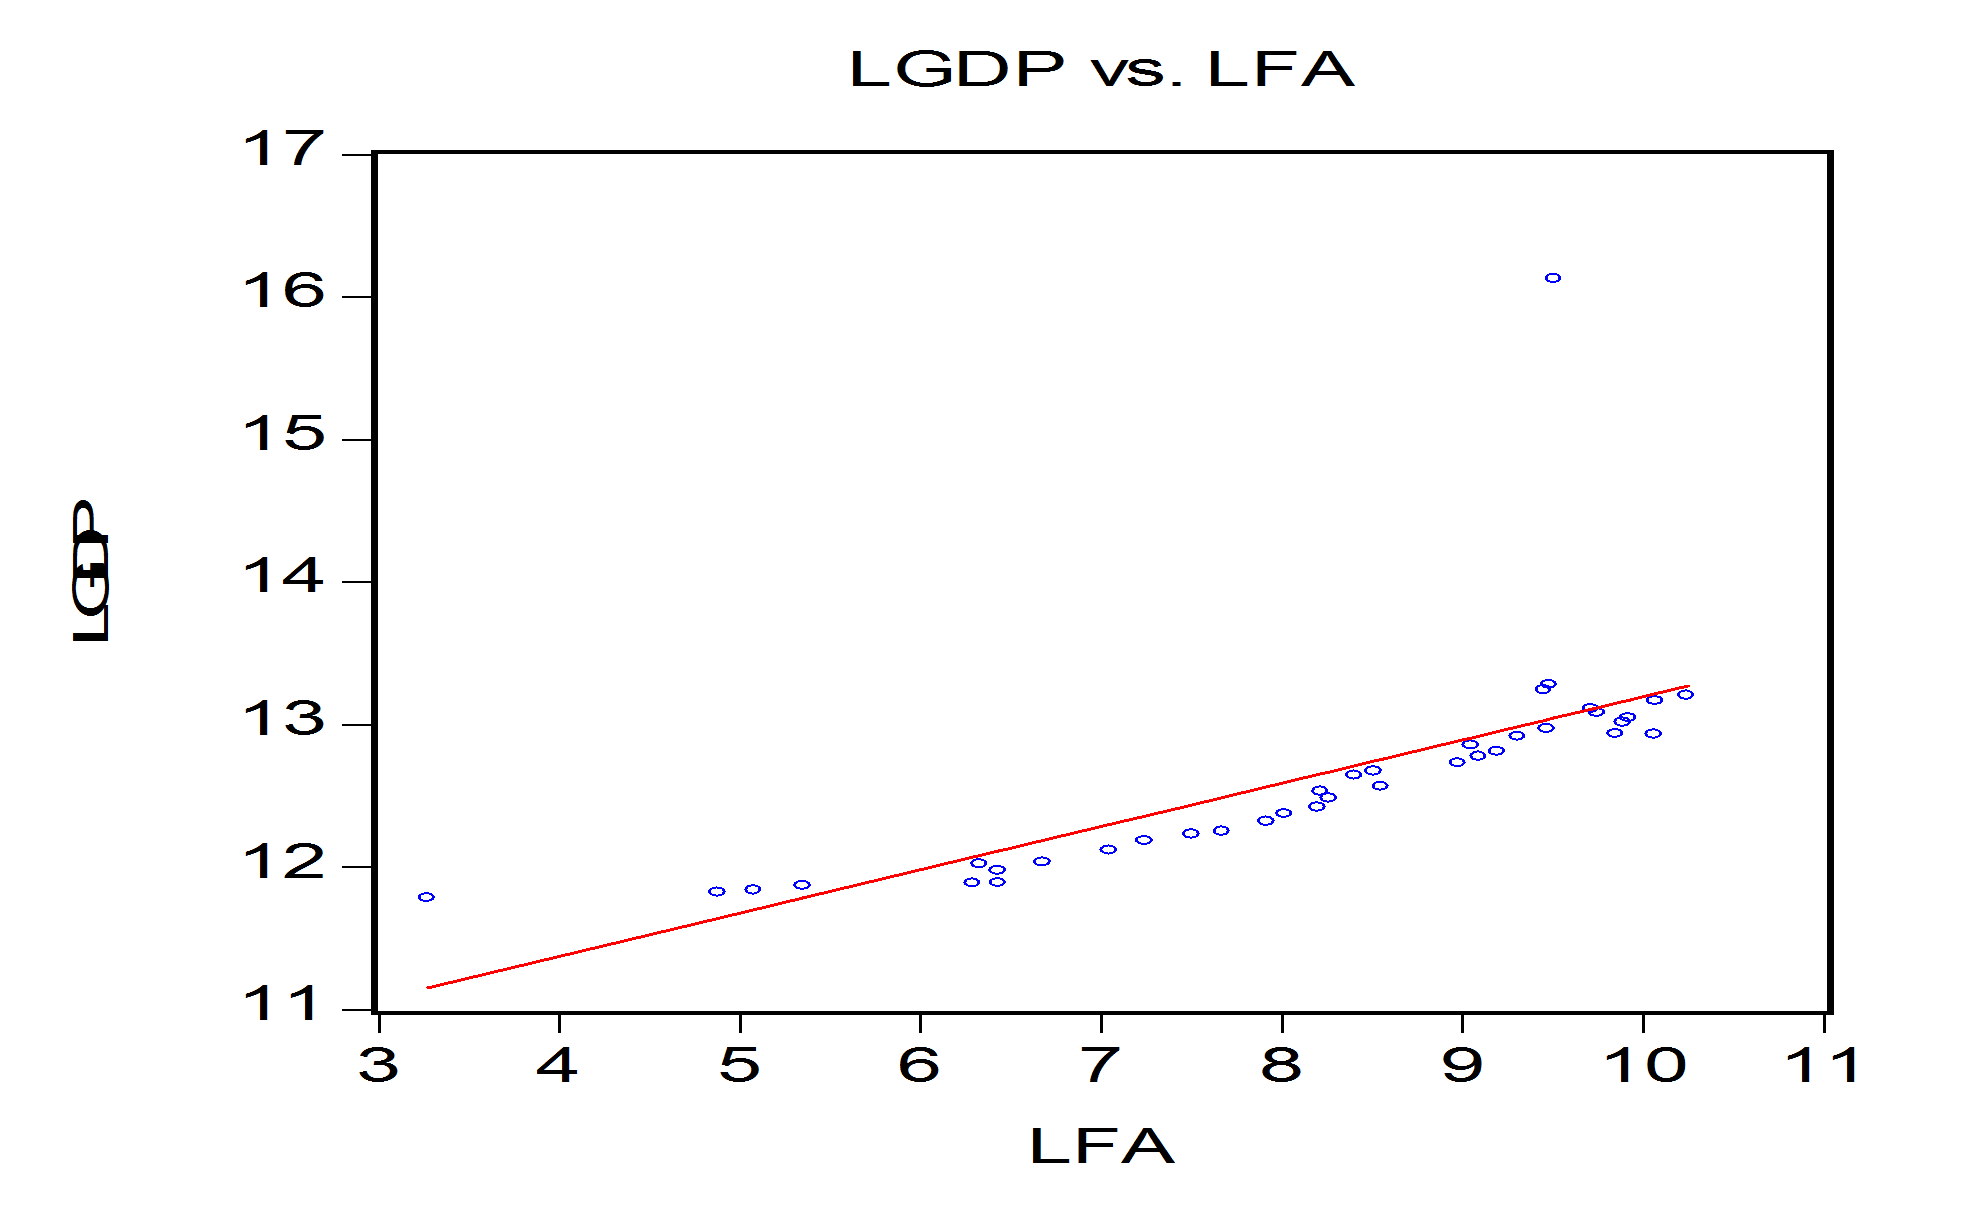 Figure 1: Scatter diagram for GDP and FA